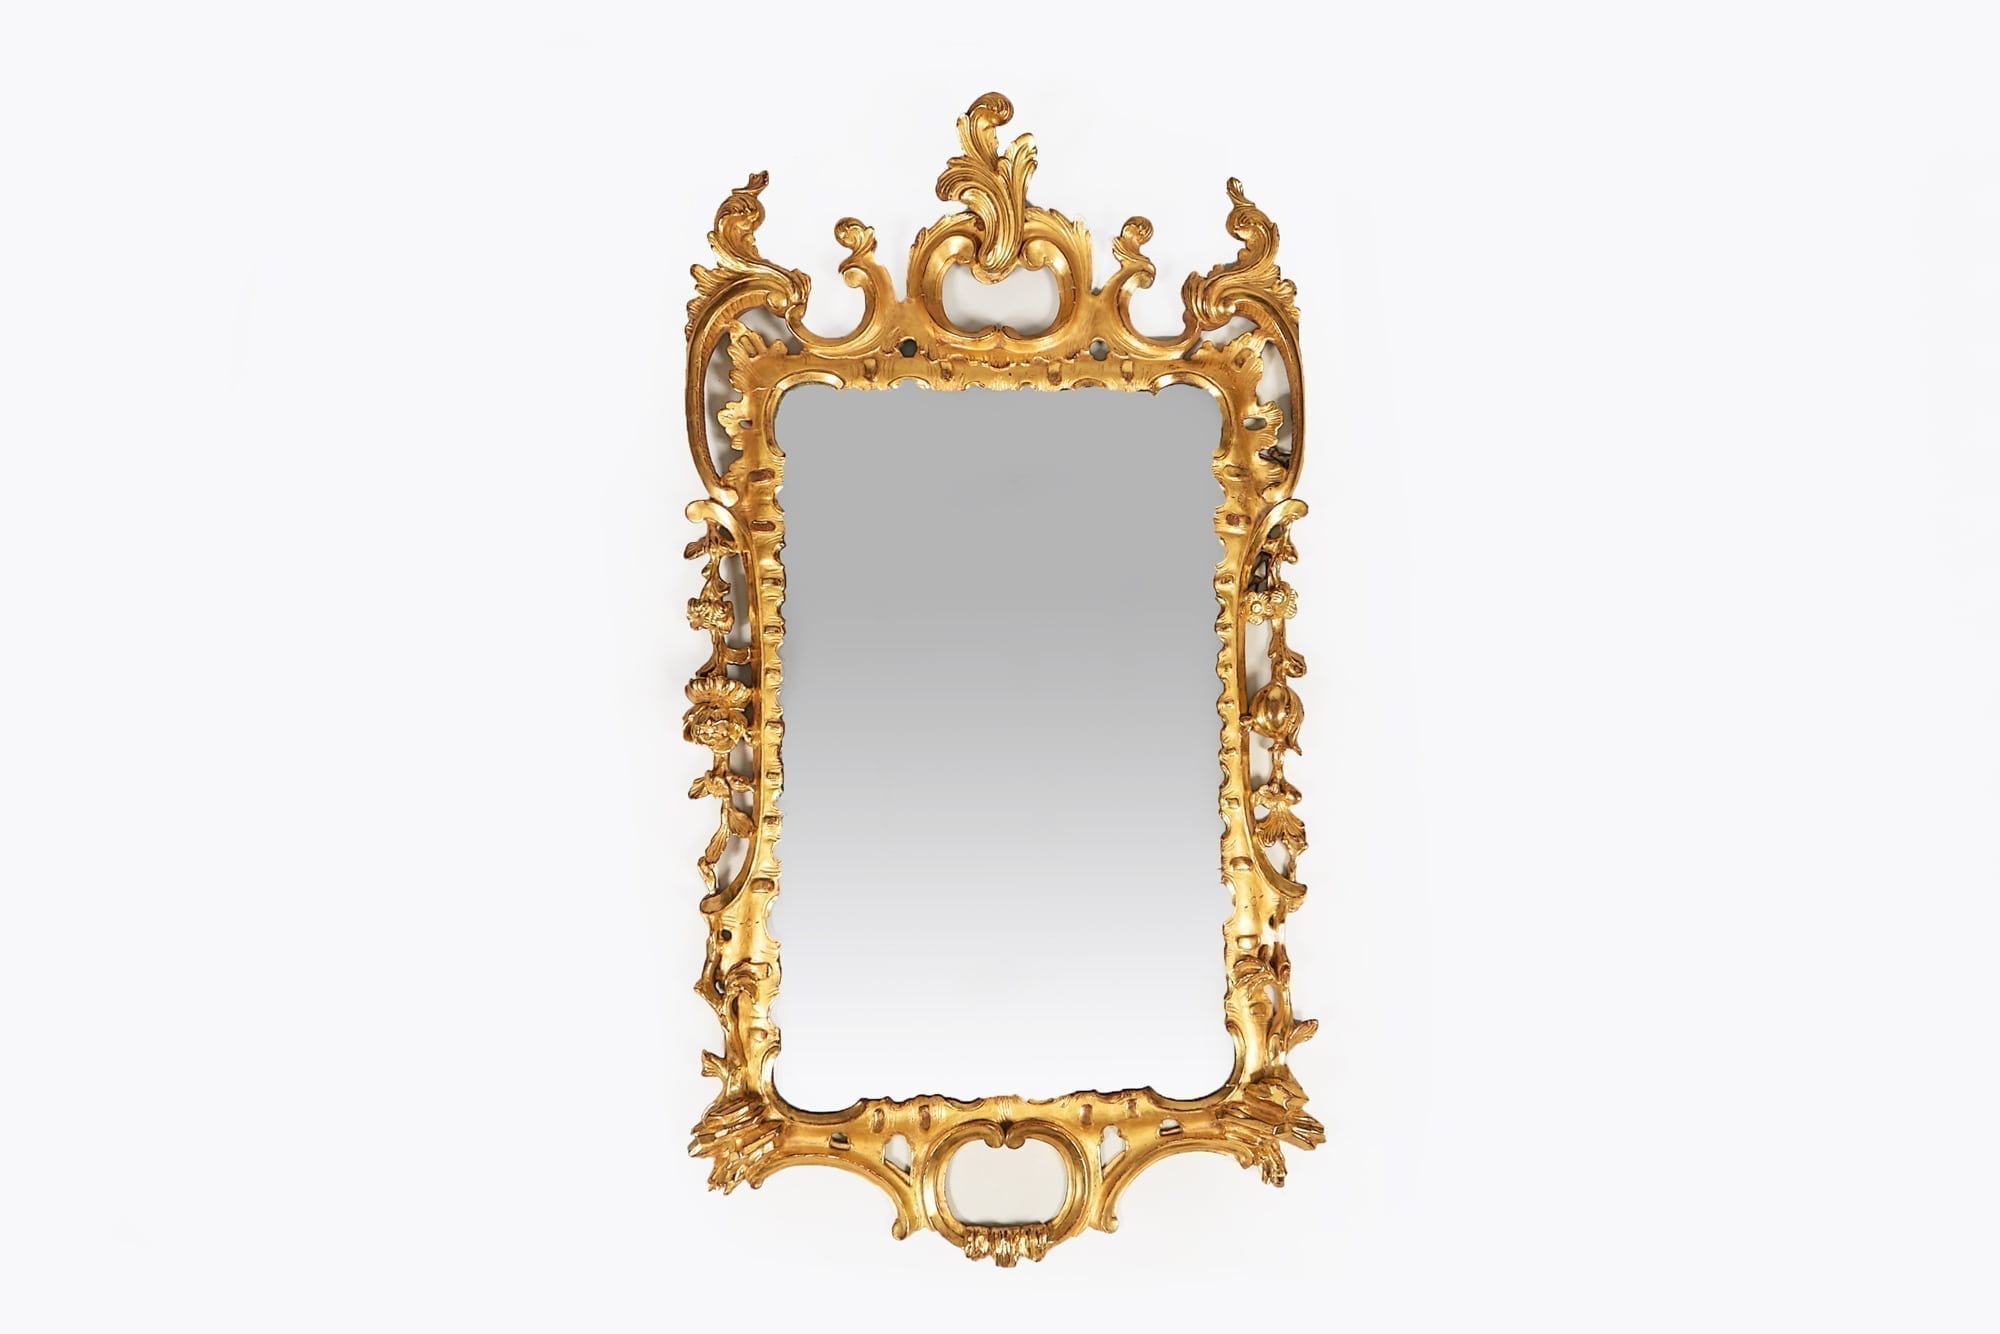 10268 - Early 19th Century William IV Water Gilded Mirror